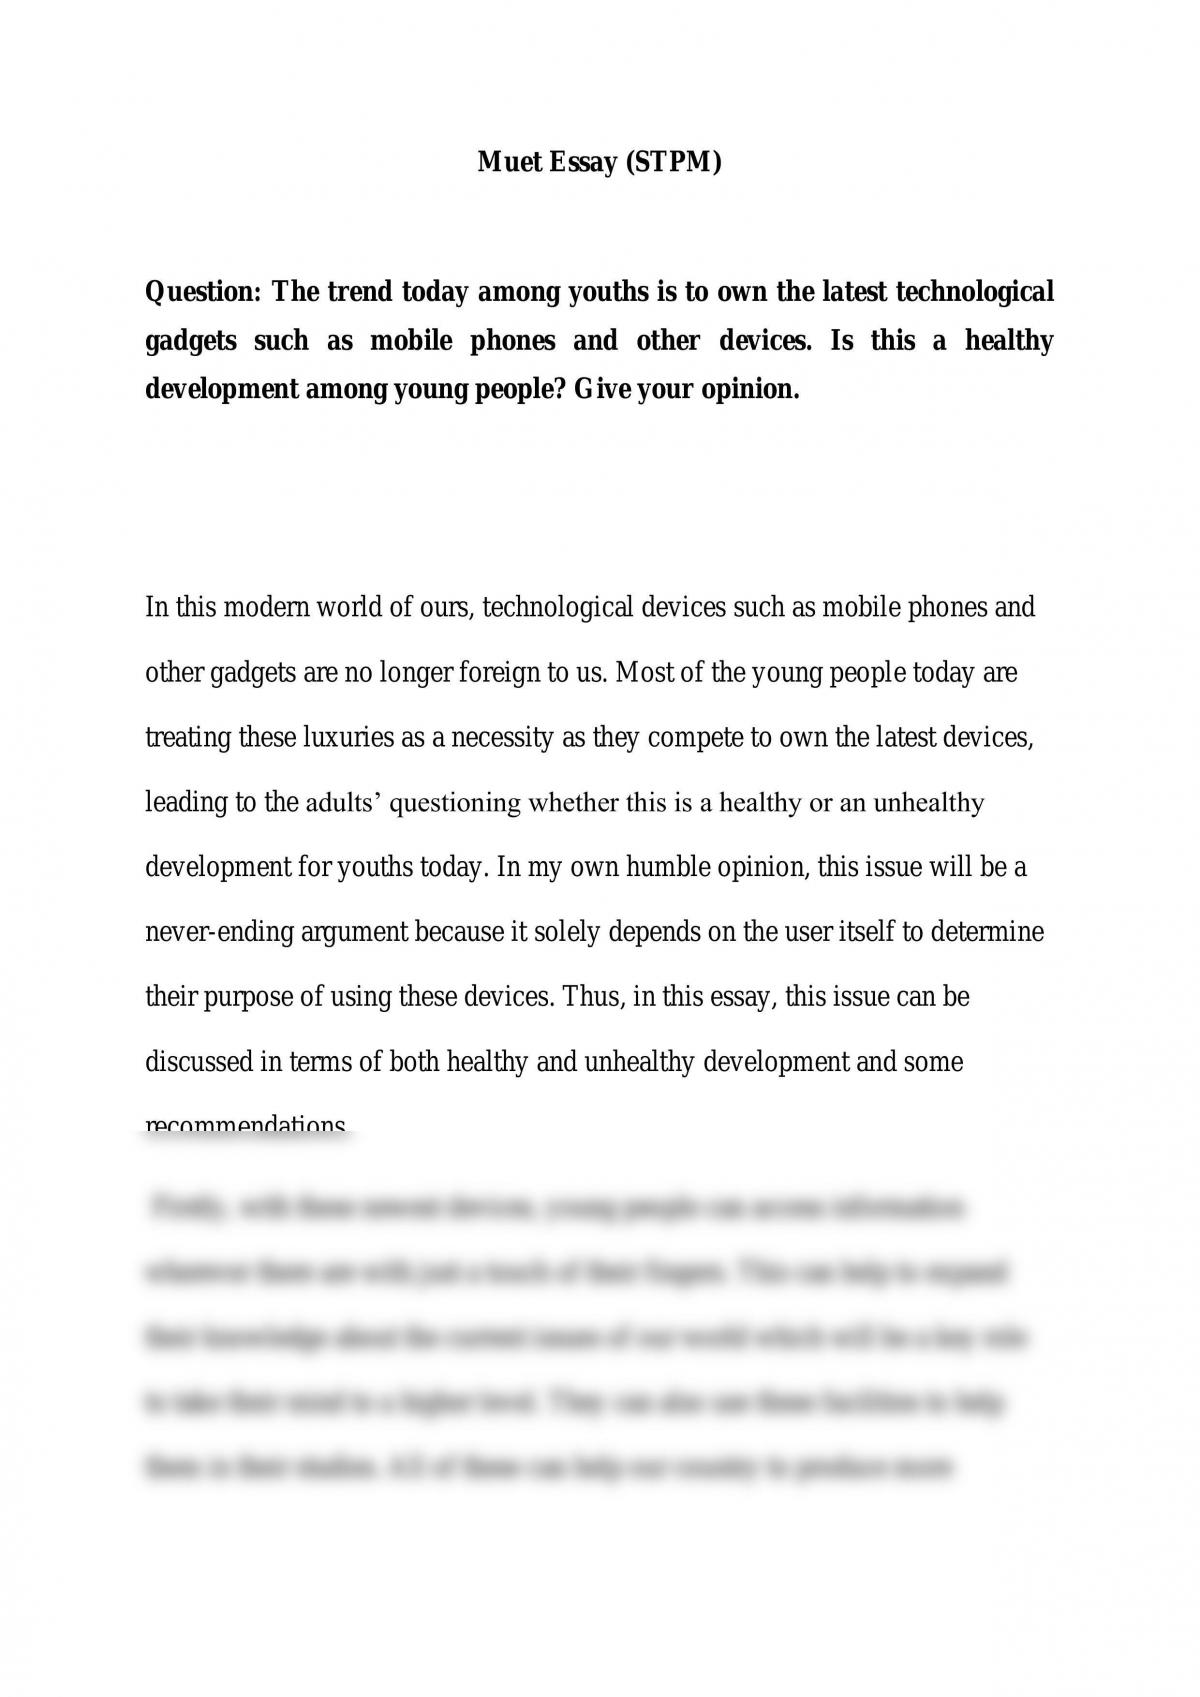 example essay for muet